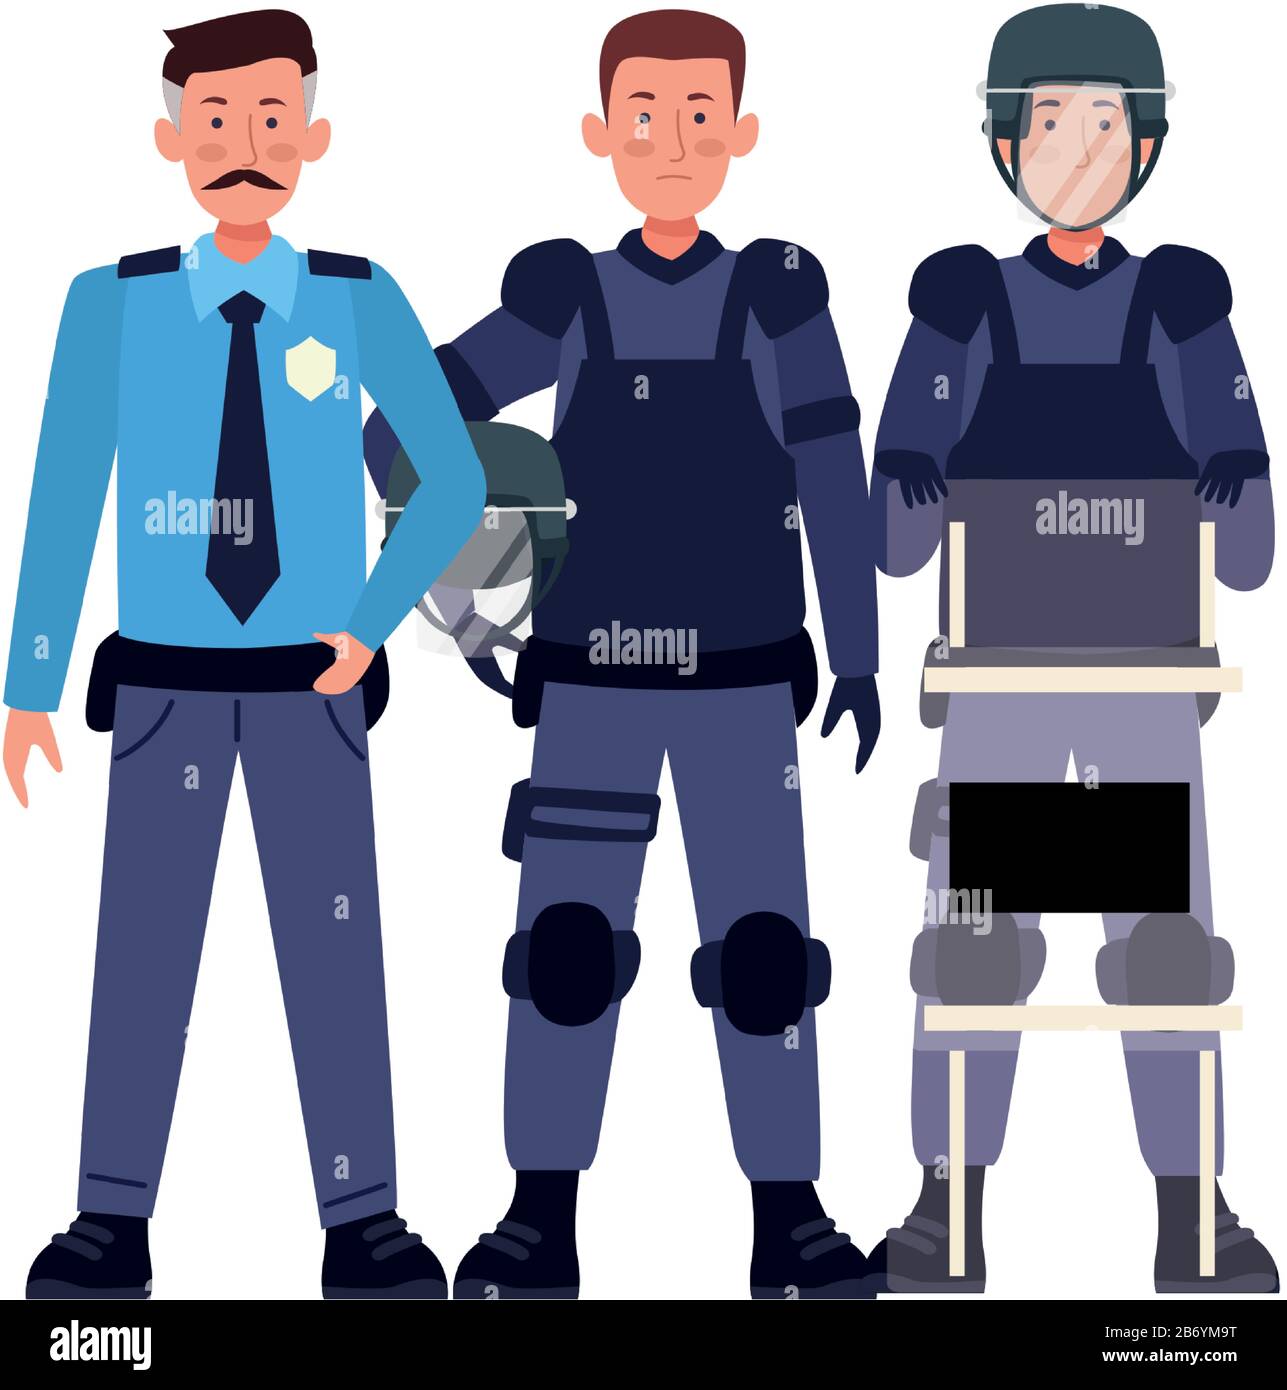 group of riot polices with uniforms characters Stock Vector